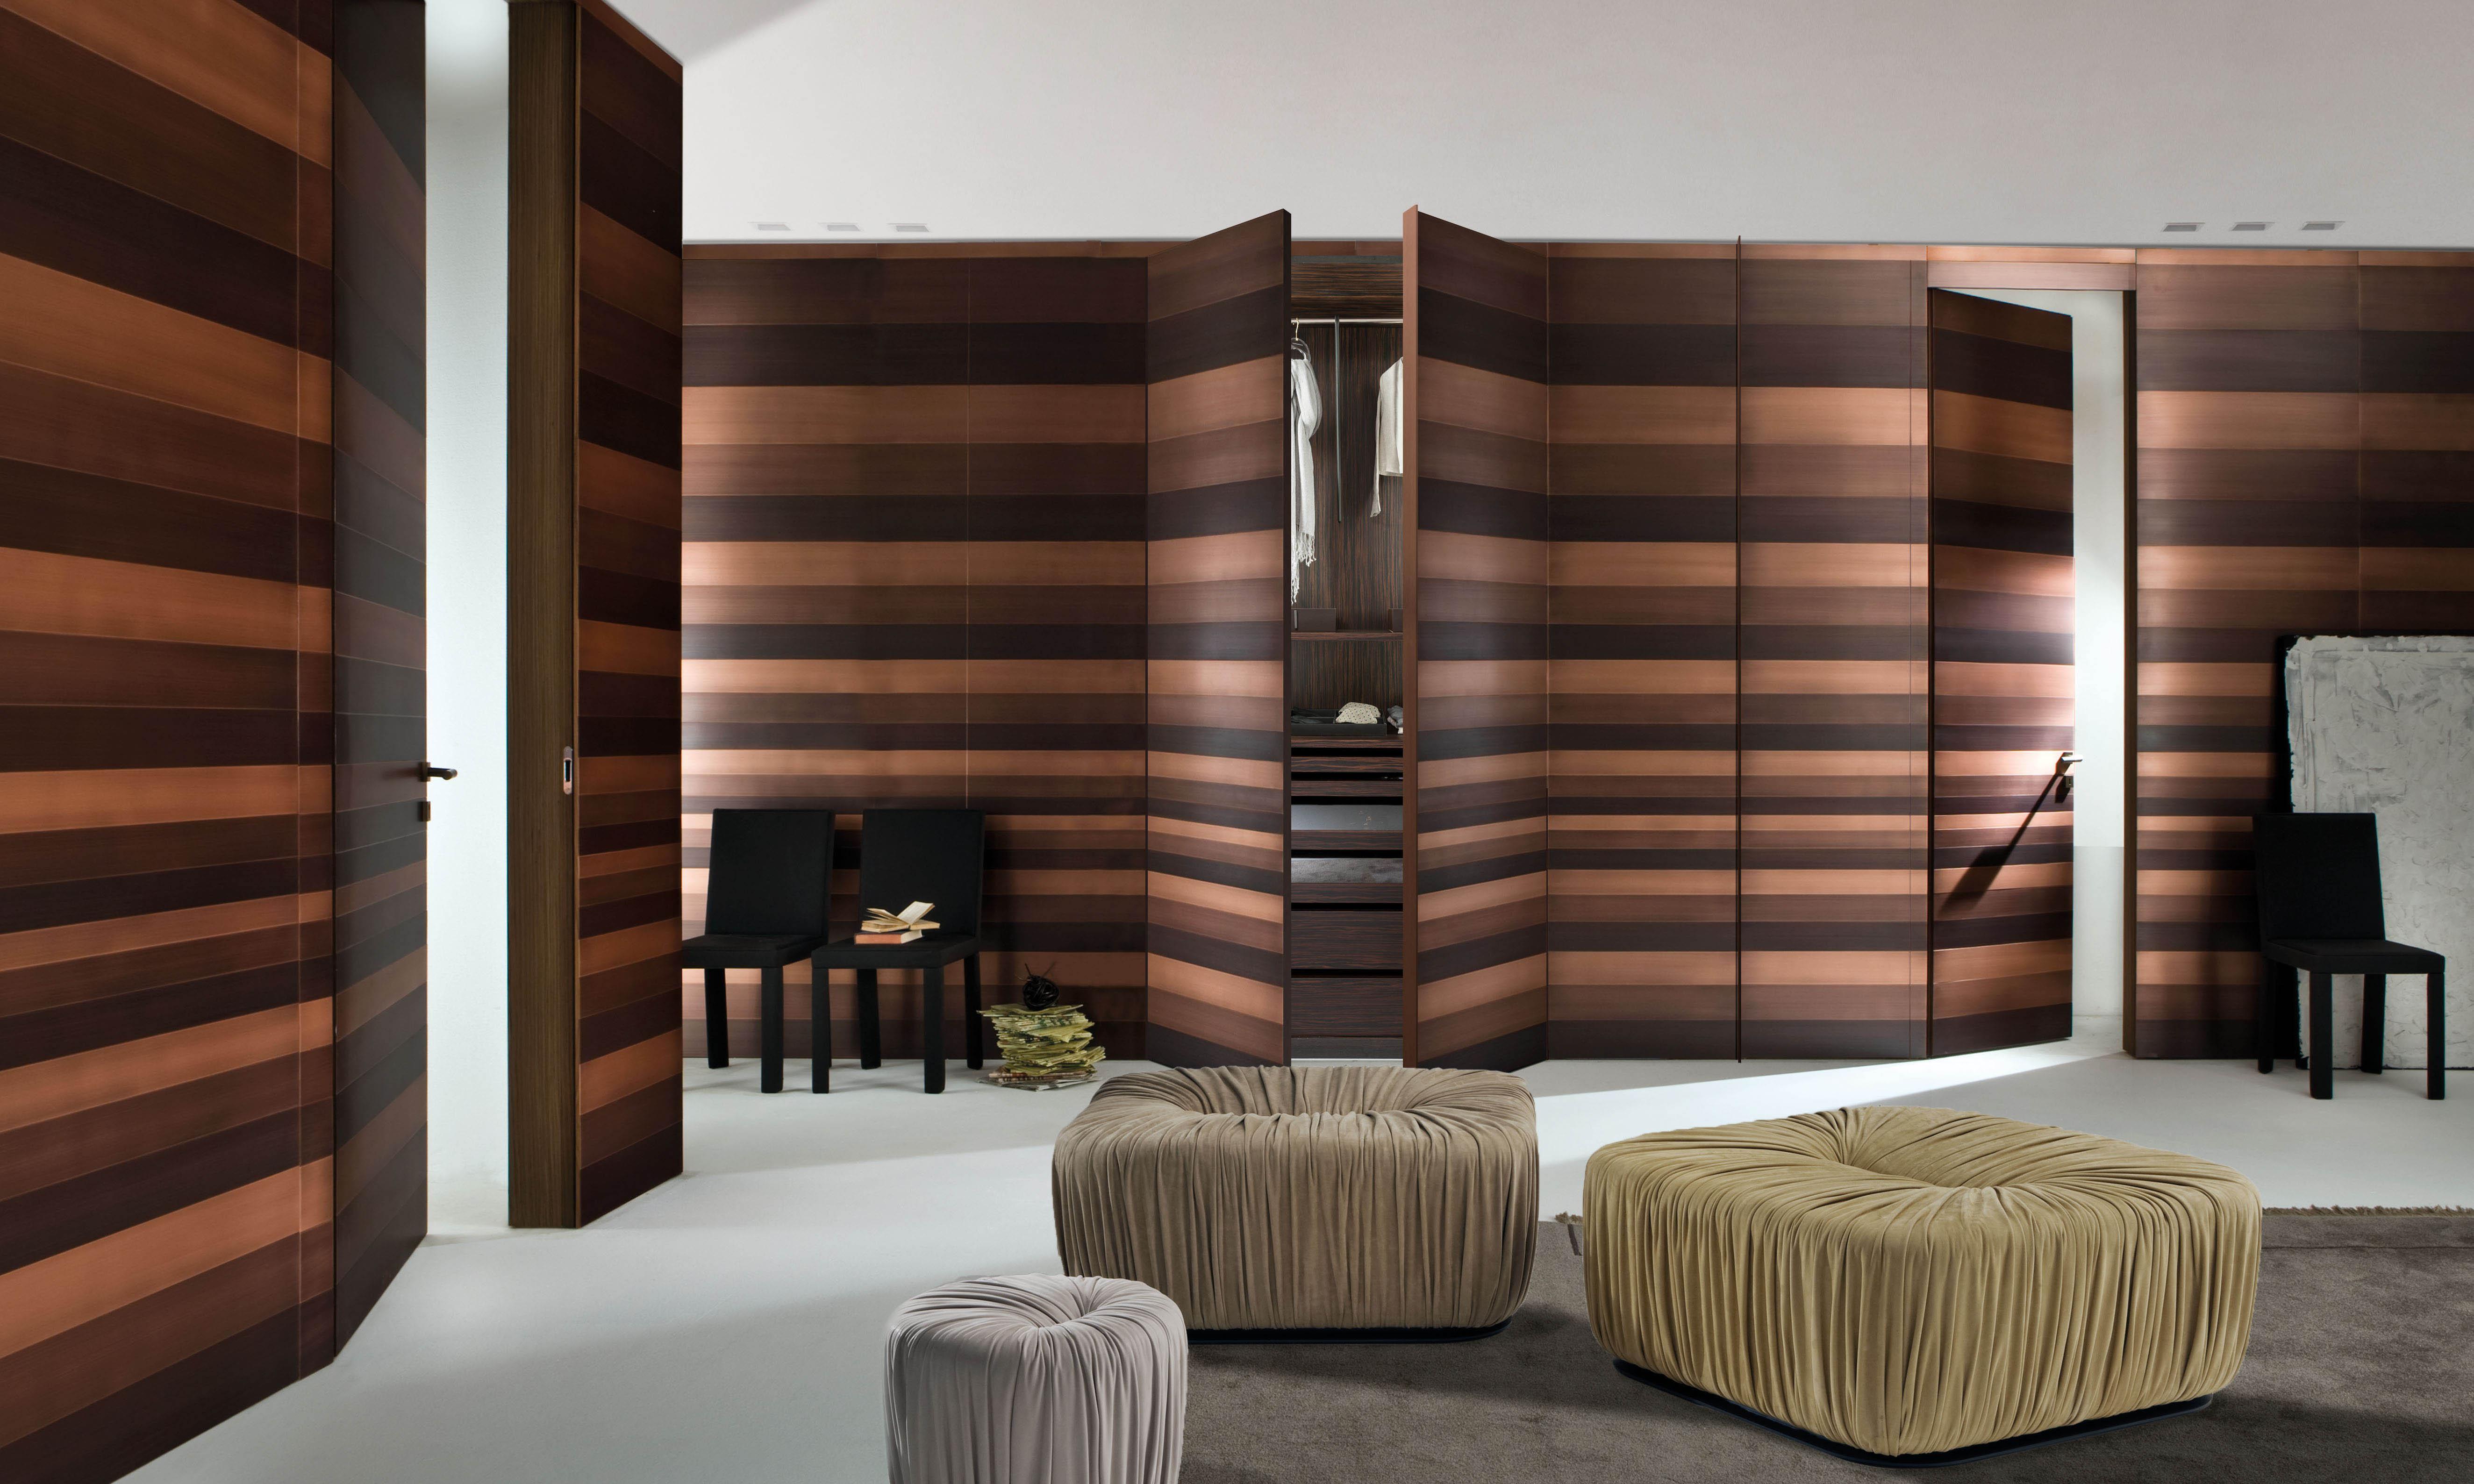 Laurameroni luxury modern integrated wardrobes and walk-in closets for a made to measure bedroom interior design and decor